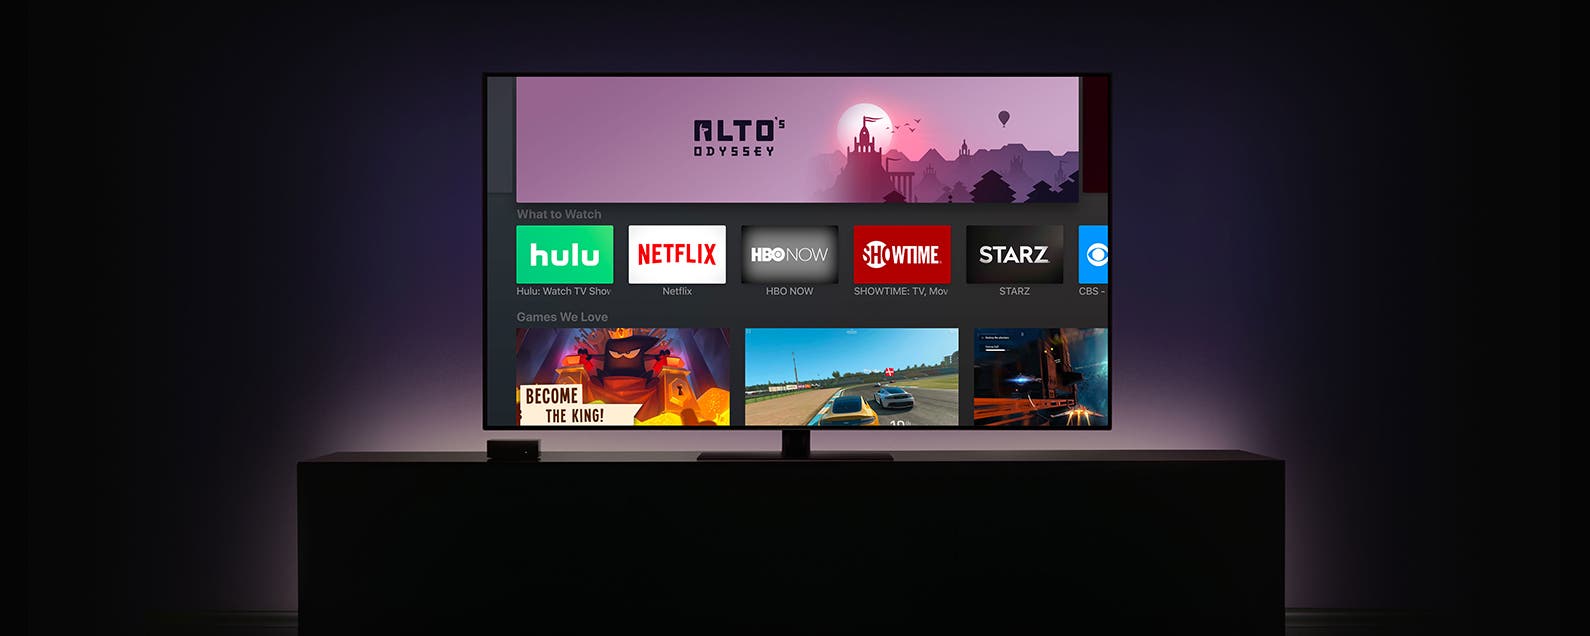 Apple TV App Store: How to Download Apps on Apple TV (tvOS 15 ...